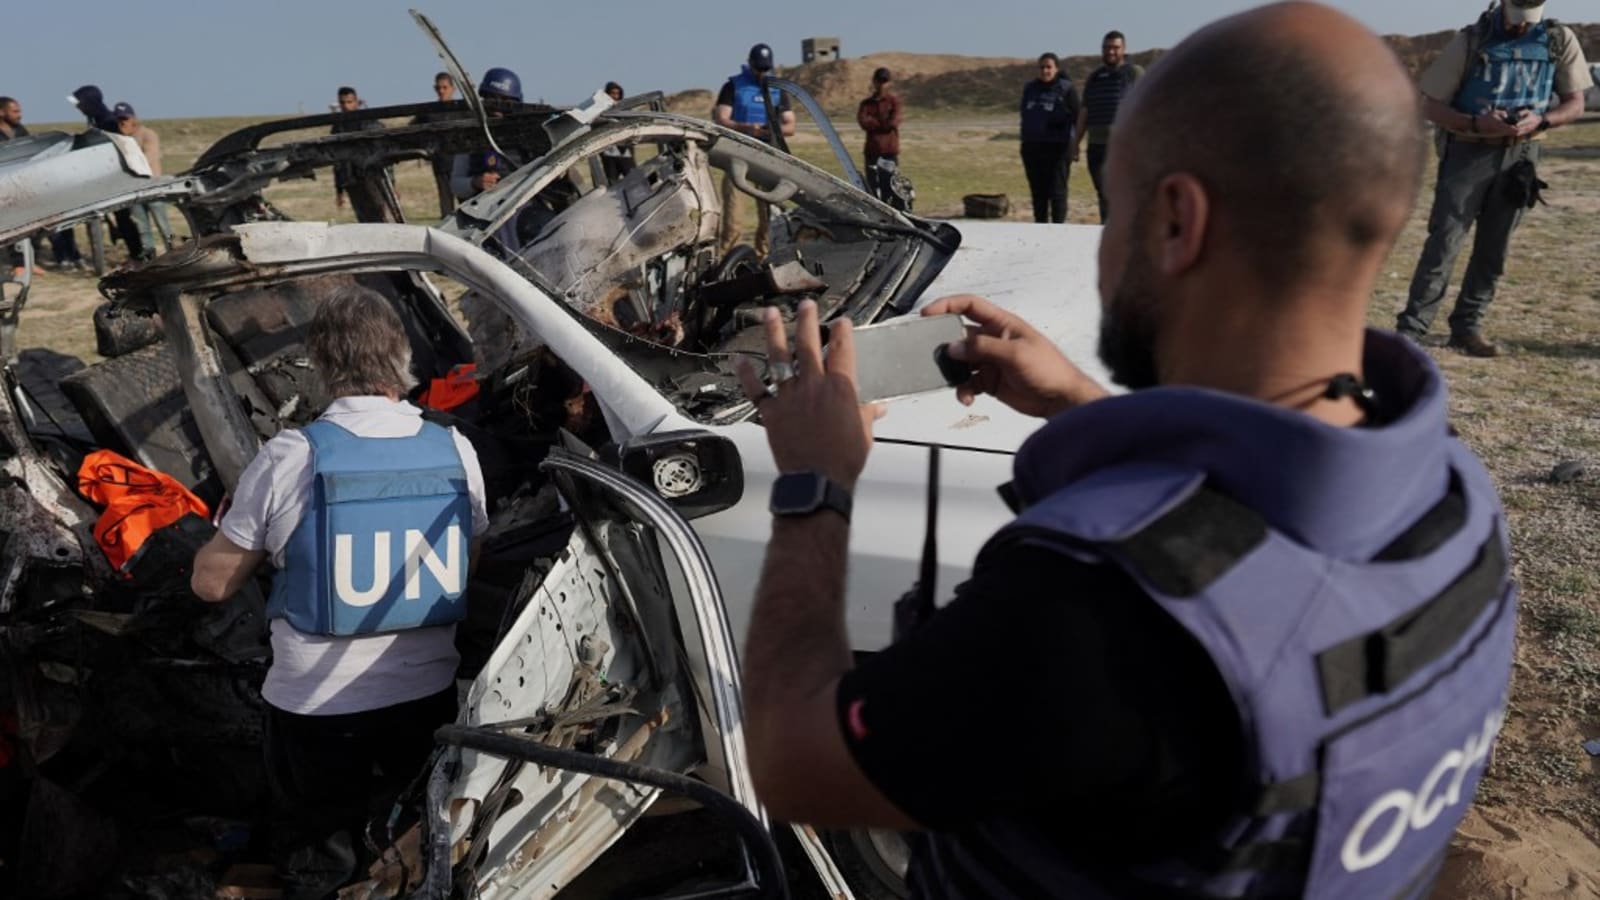 Aid groups urge change after ‘systematic’ Israel attacks on humanitarian efforts in Gaza